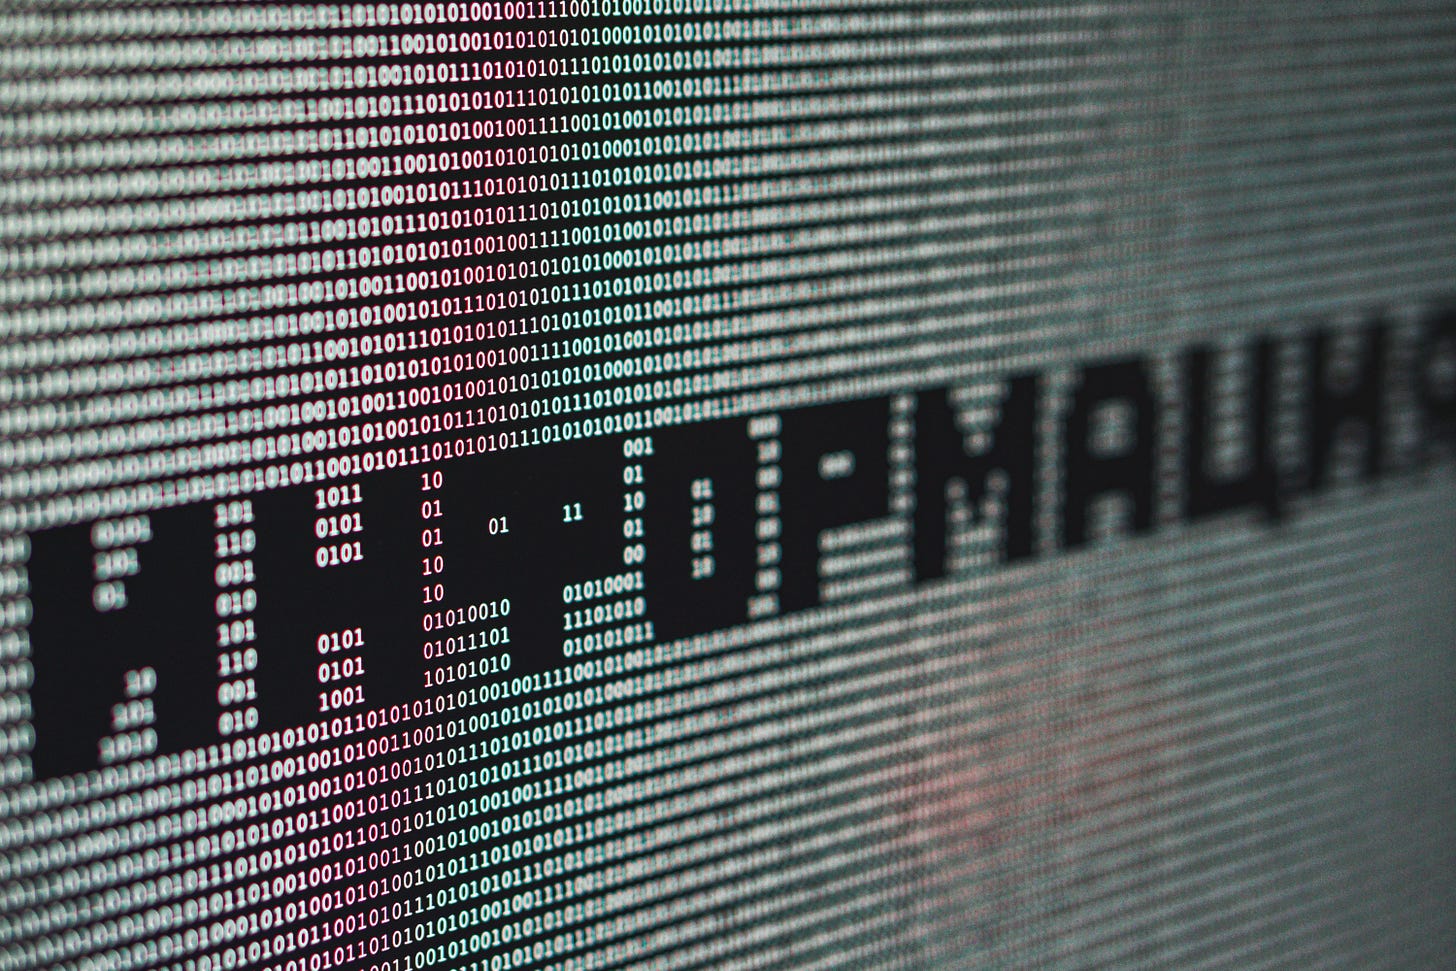 Russian text overlaid on a screen of binary data.